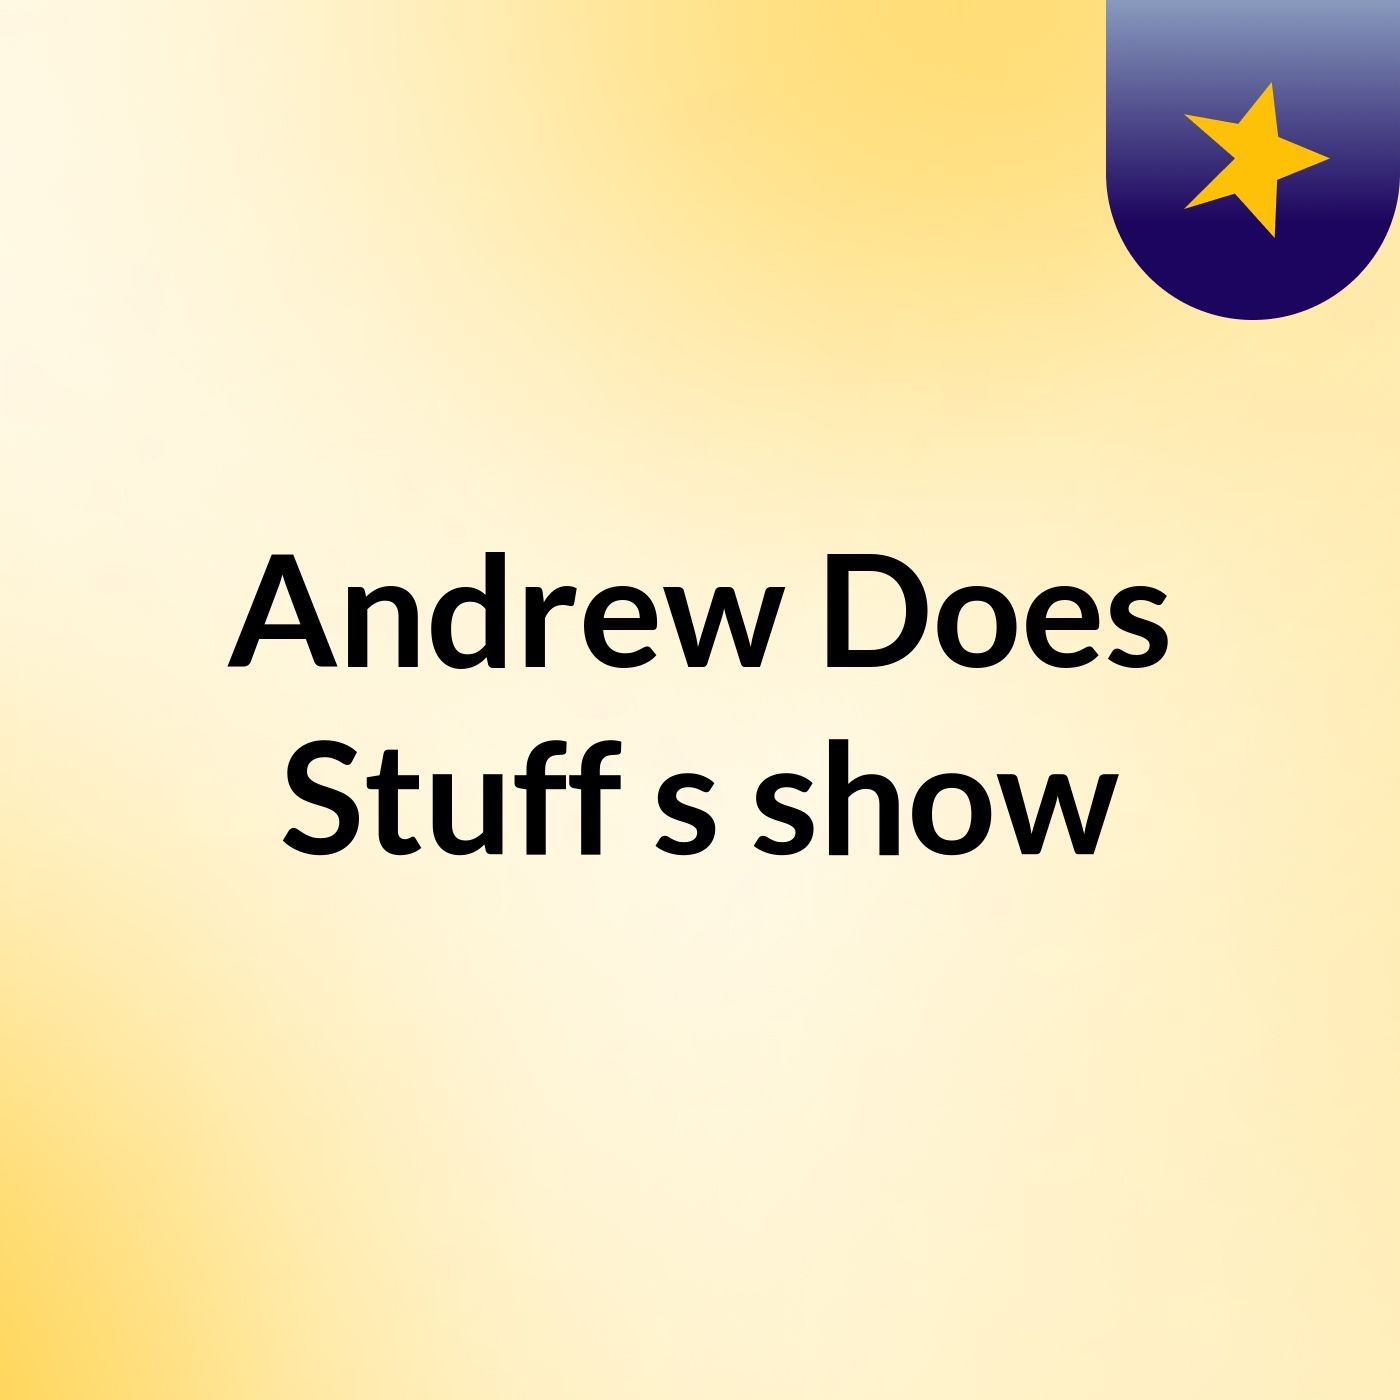 Andrew Does Stuff's show